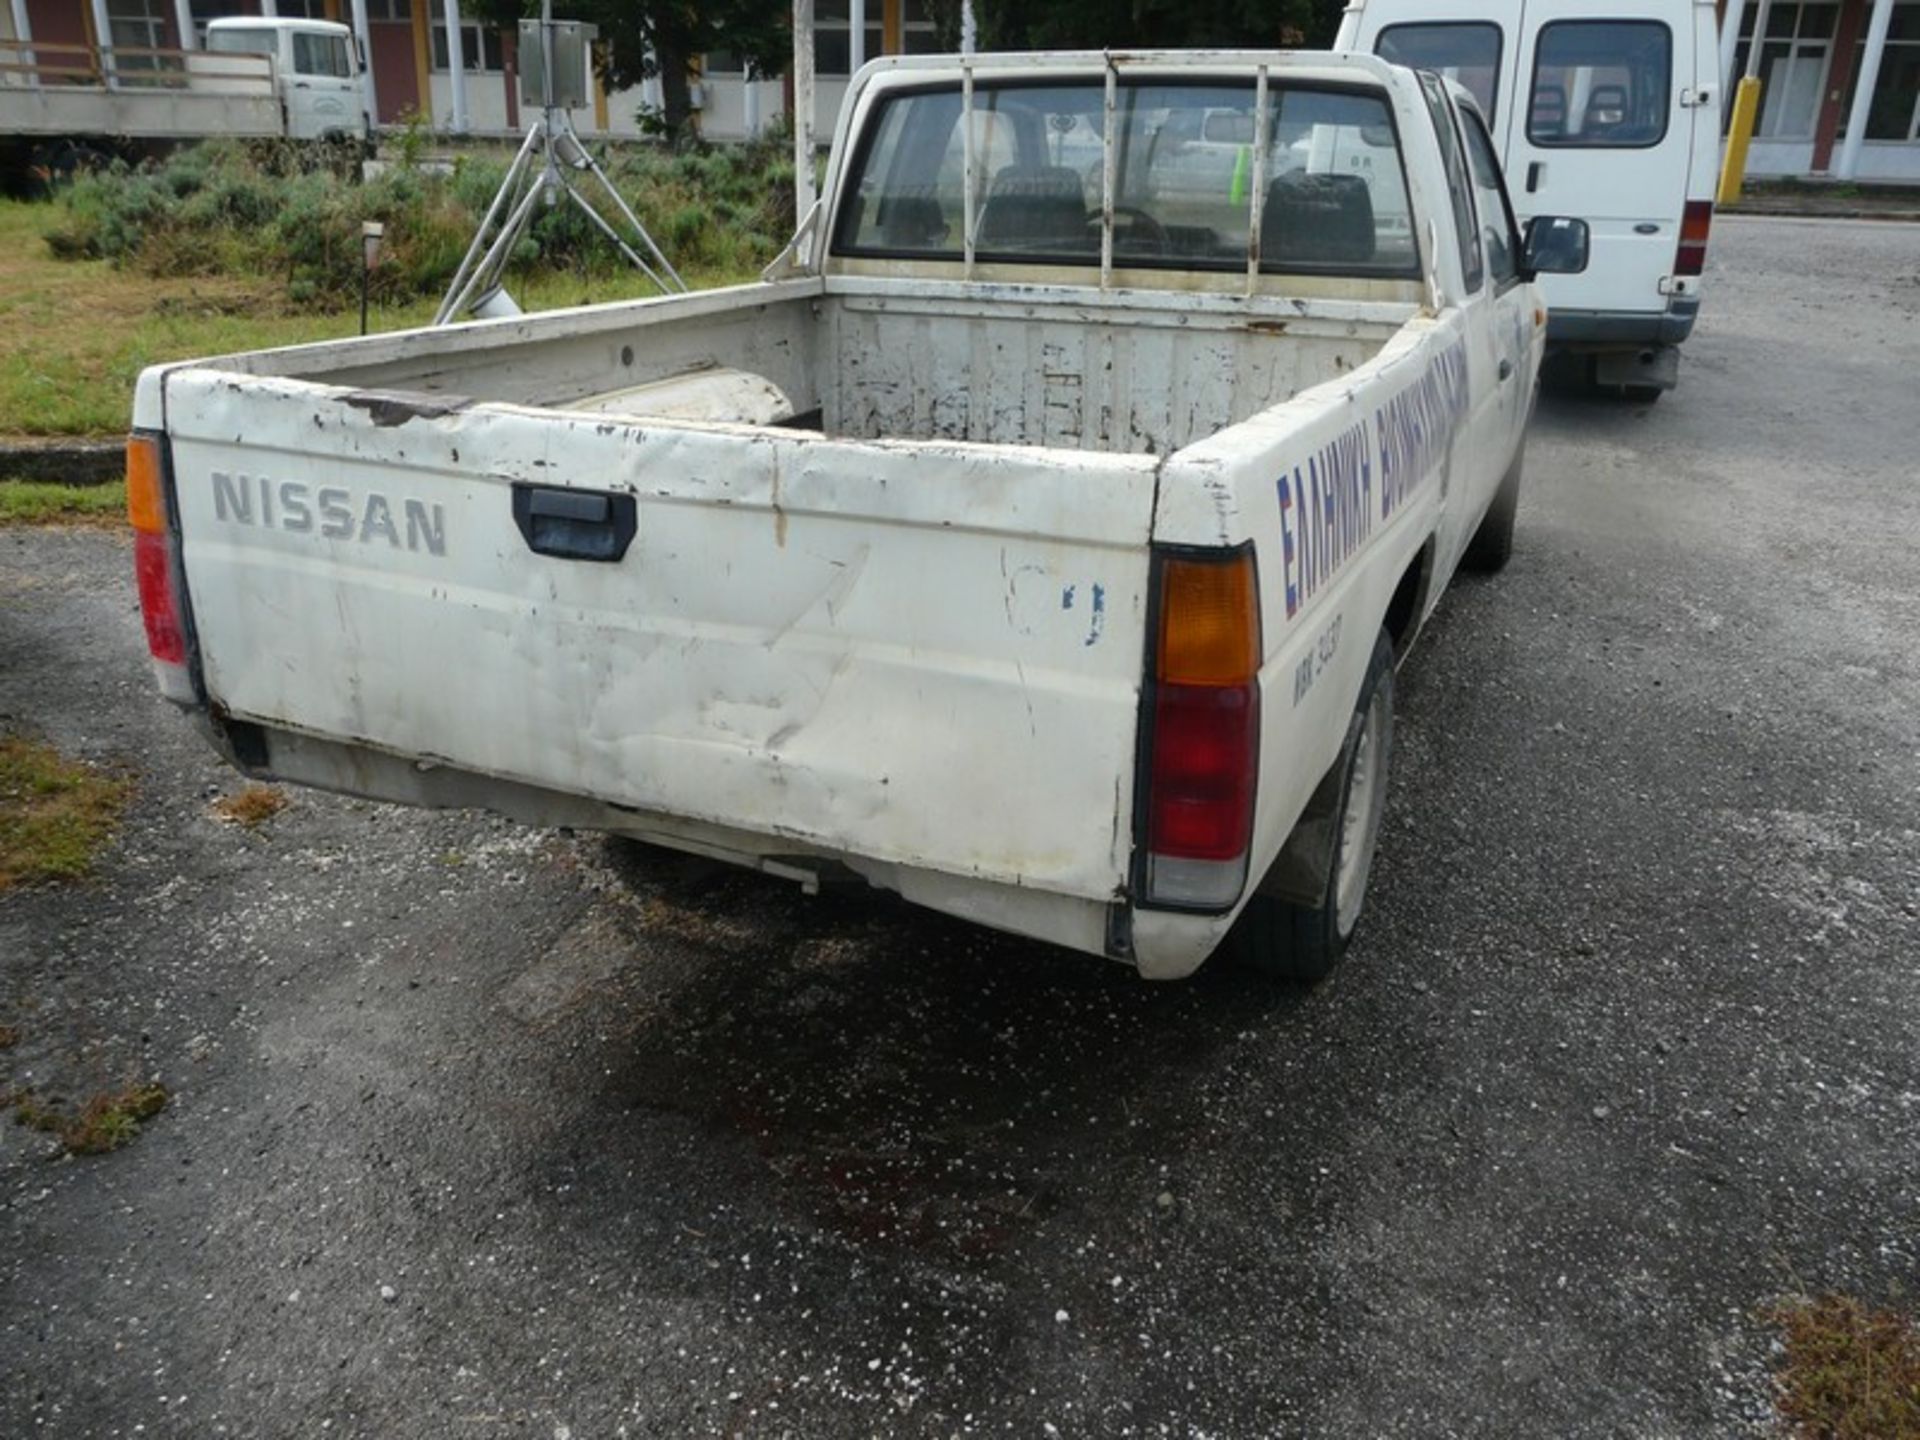 NISSAN KING CAB , REG: NBK 3437,PICK UP, PETROL ,KM 354381, WORKING CONDITION , MISSING BATTERY ( - Image 4 of 11